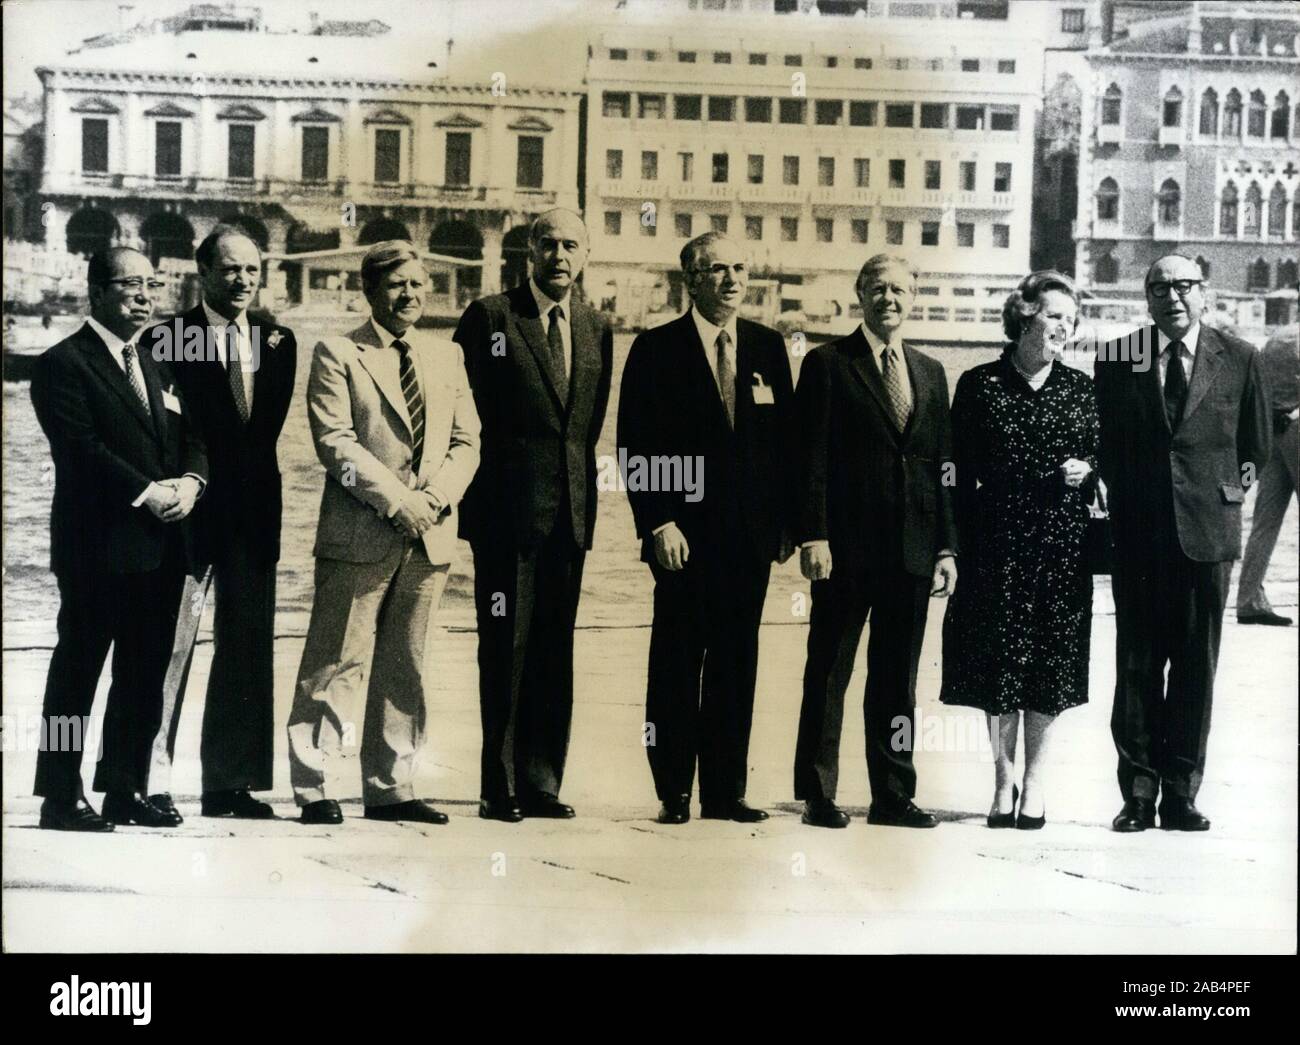 Jun. 24, 1980 - Venice, Italy - The 6th G7 Economic Summit Meeting was held in Venice from June 22-23 and attended by leaders from around the world. Leaders pose for a photograph with views of Venice in the background, from left, Japan's Foreign Minister SABURO OKITA, Prime Minister of Canada PIERRE ELLIOTT TRUDEAU, West Germany's Chancellor HELMUT SCHMIDT, French President GISCARD D'ESTAING, Italy's Council President FRANCESCO COSSIGA, American President JIMMY CARTER, Britain's Prime Minister MARGARET THATCHER, and President of the European Commission ROY JENKINS. (Credit Image: © Keystone Pr Stock Photo